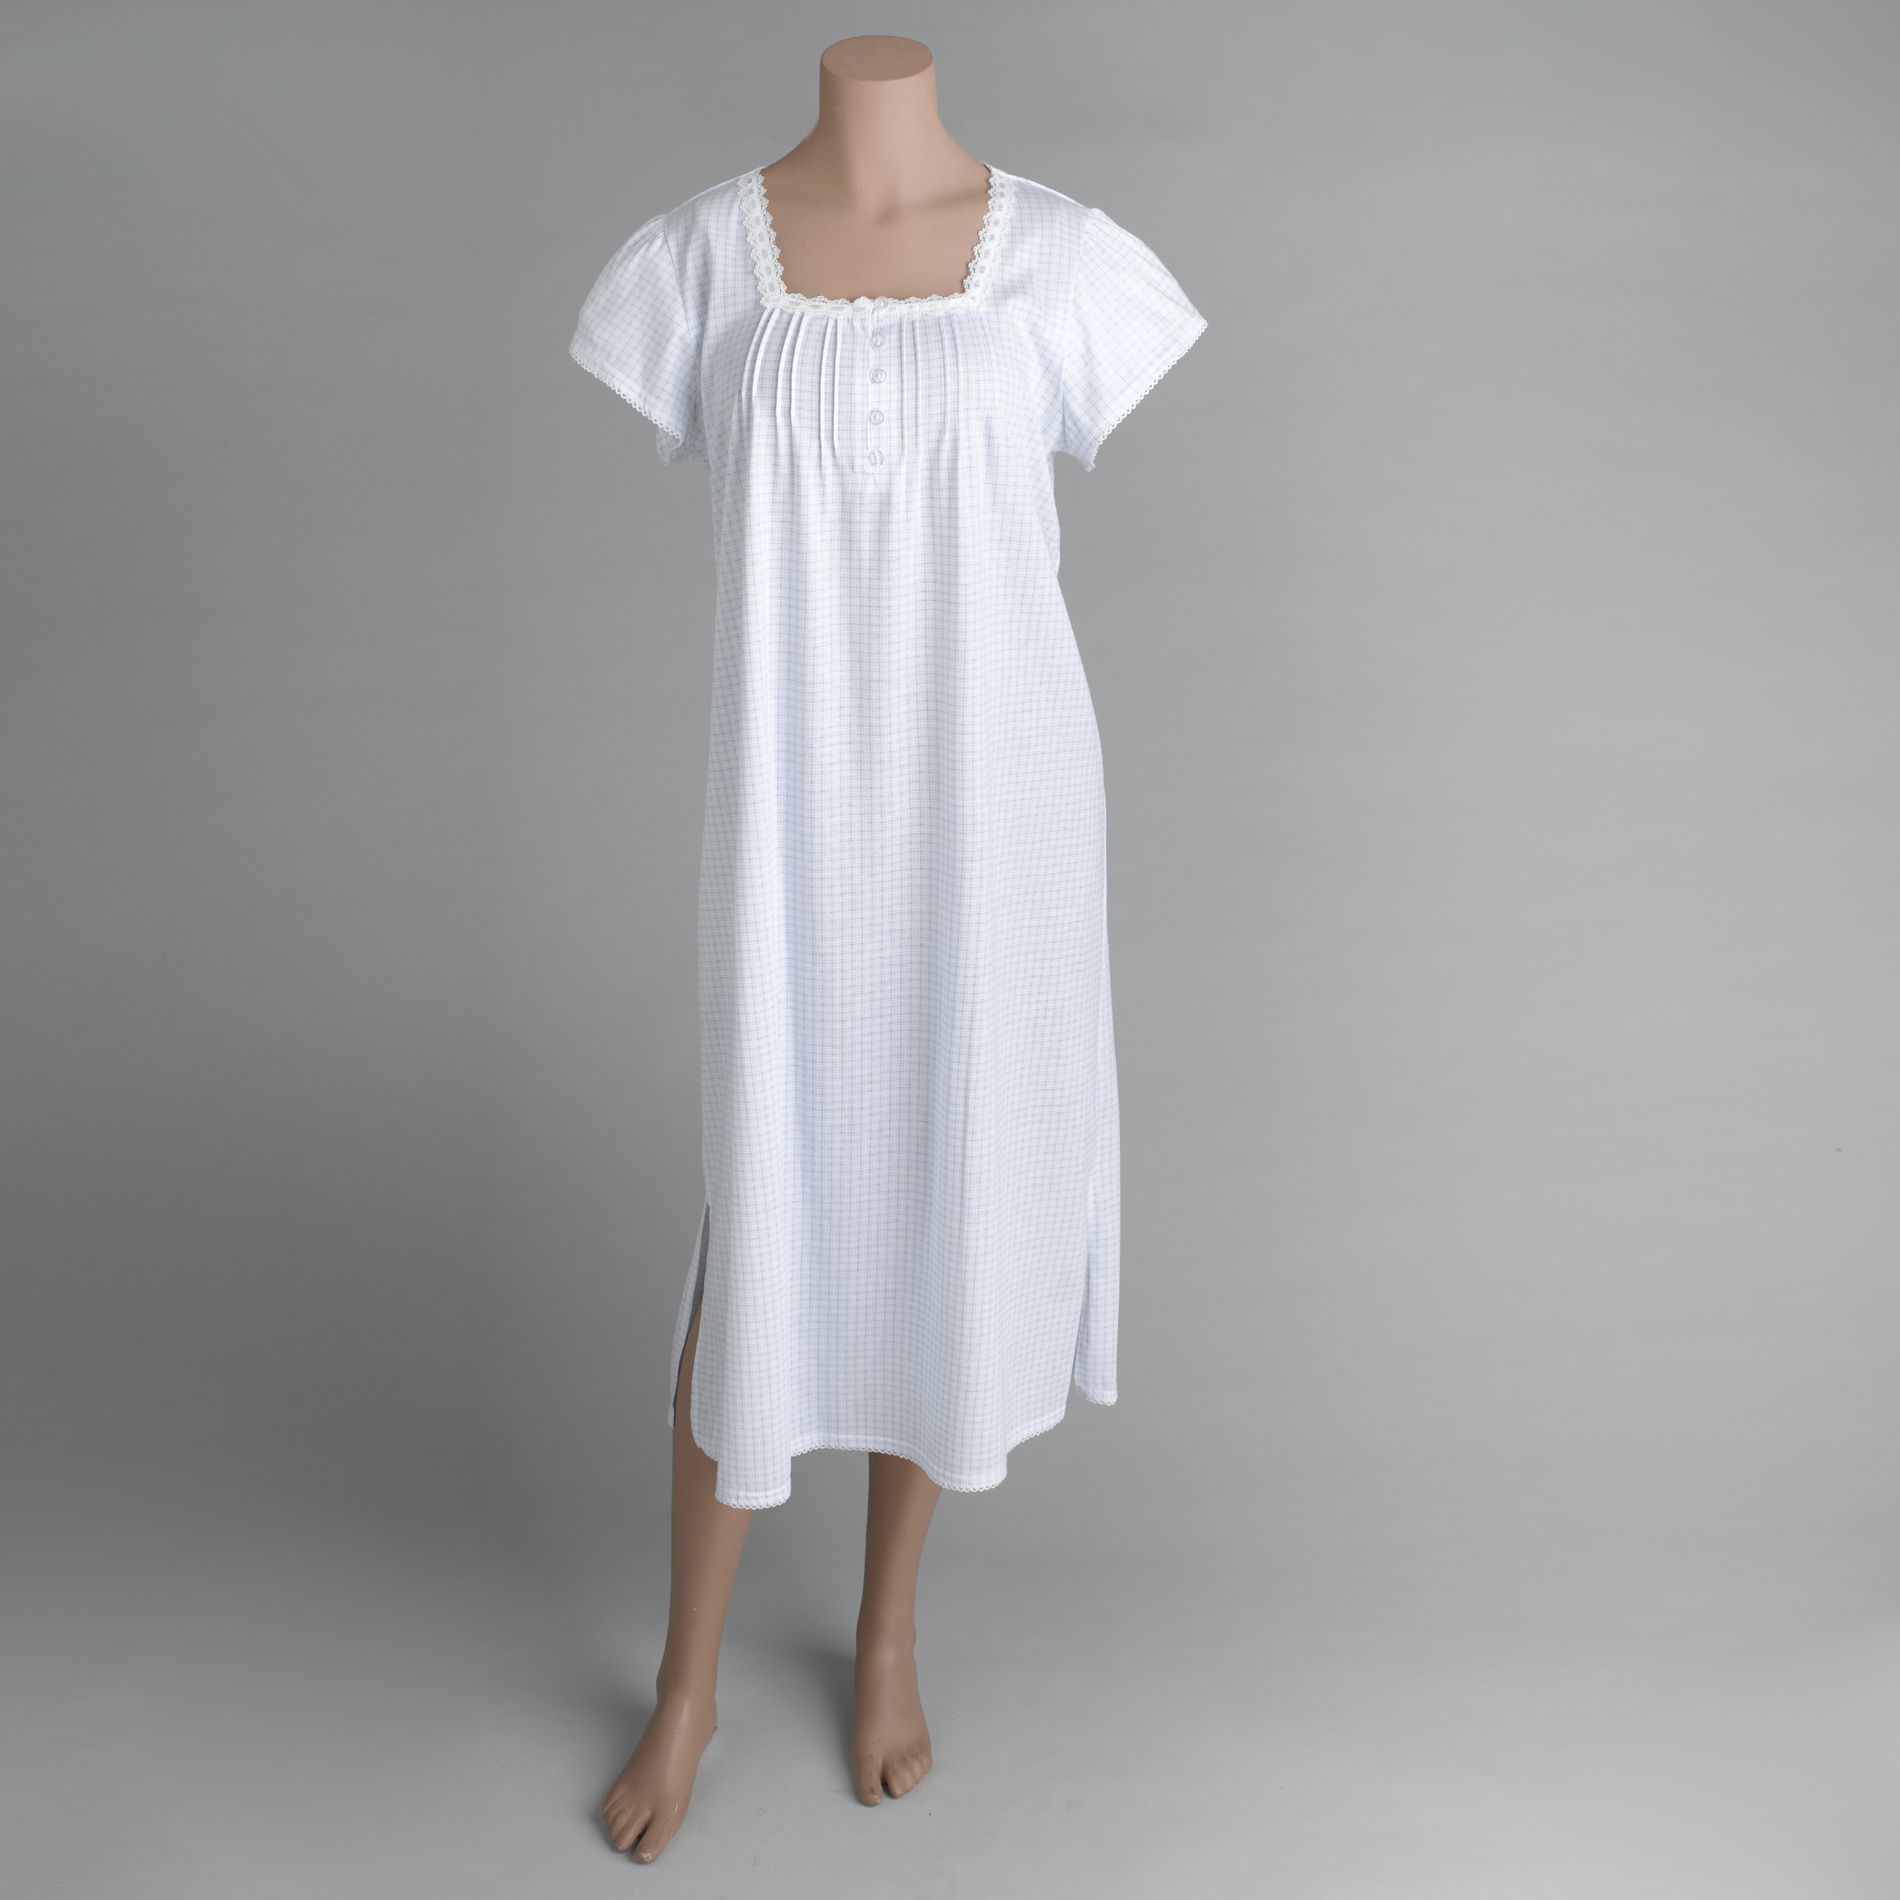 Heavenly Bodies by Miss Elaine Women's Nightgown